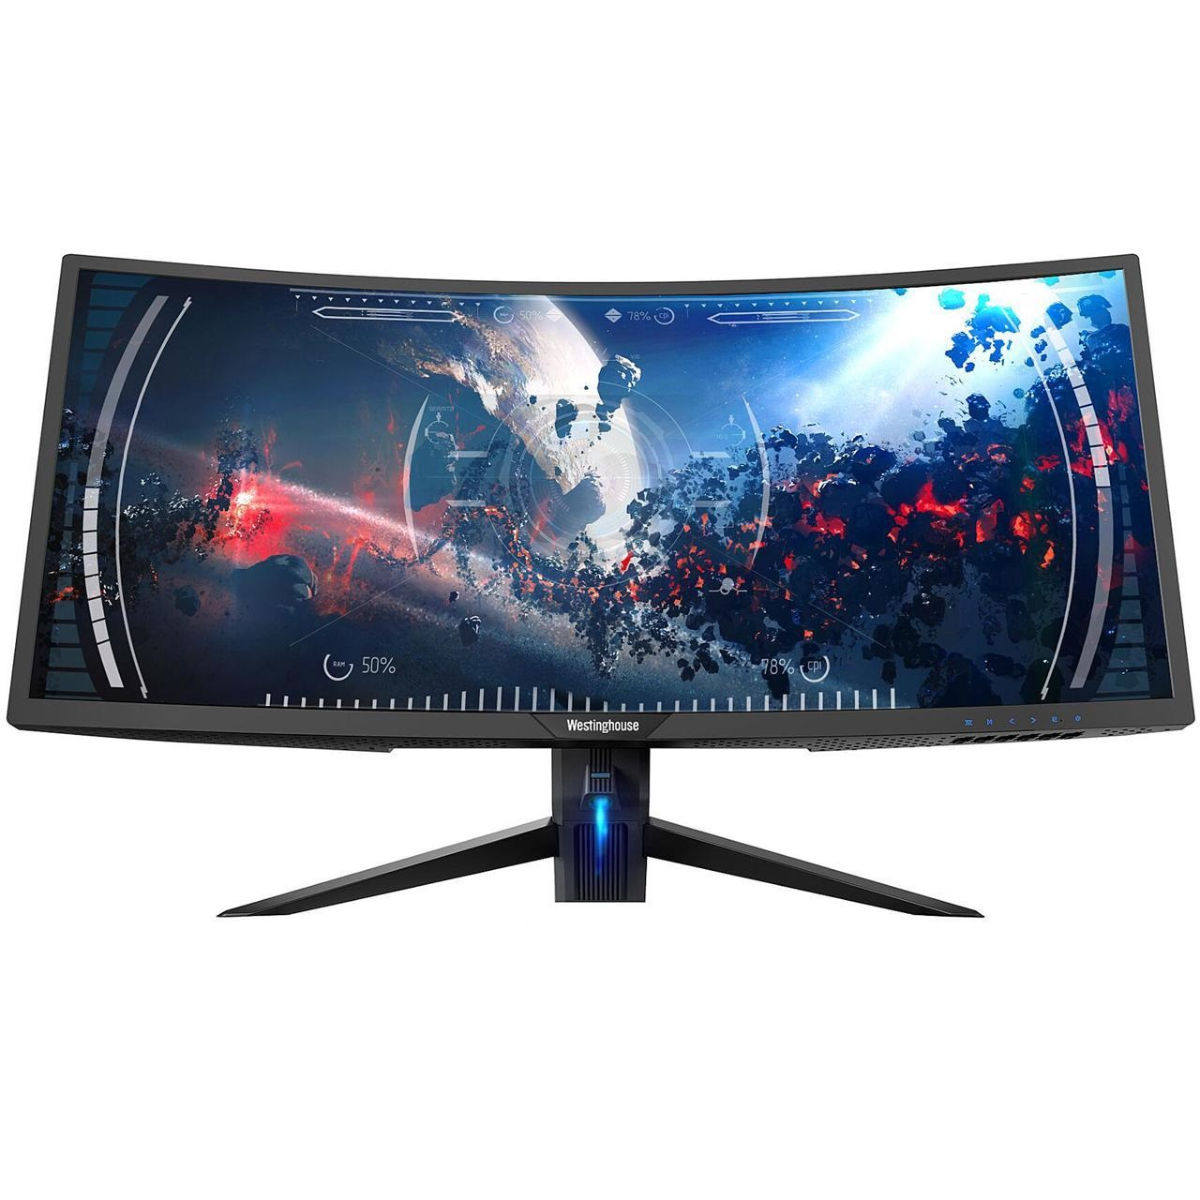 Westinghouse WC34DX9019 34-Inch Curved LED Gaming Monitor